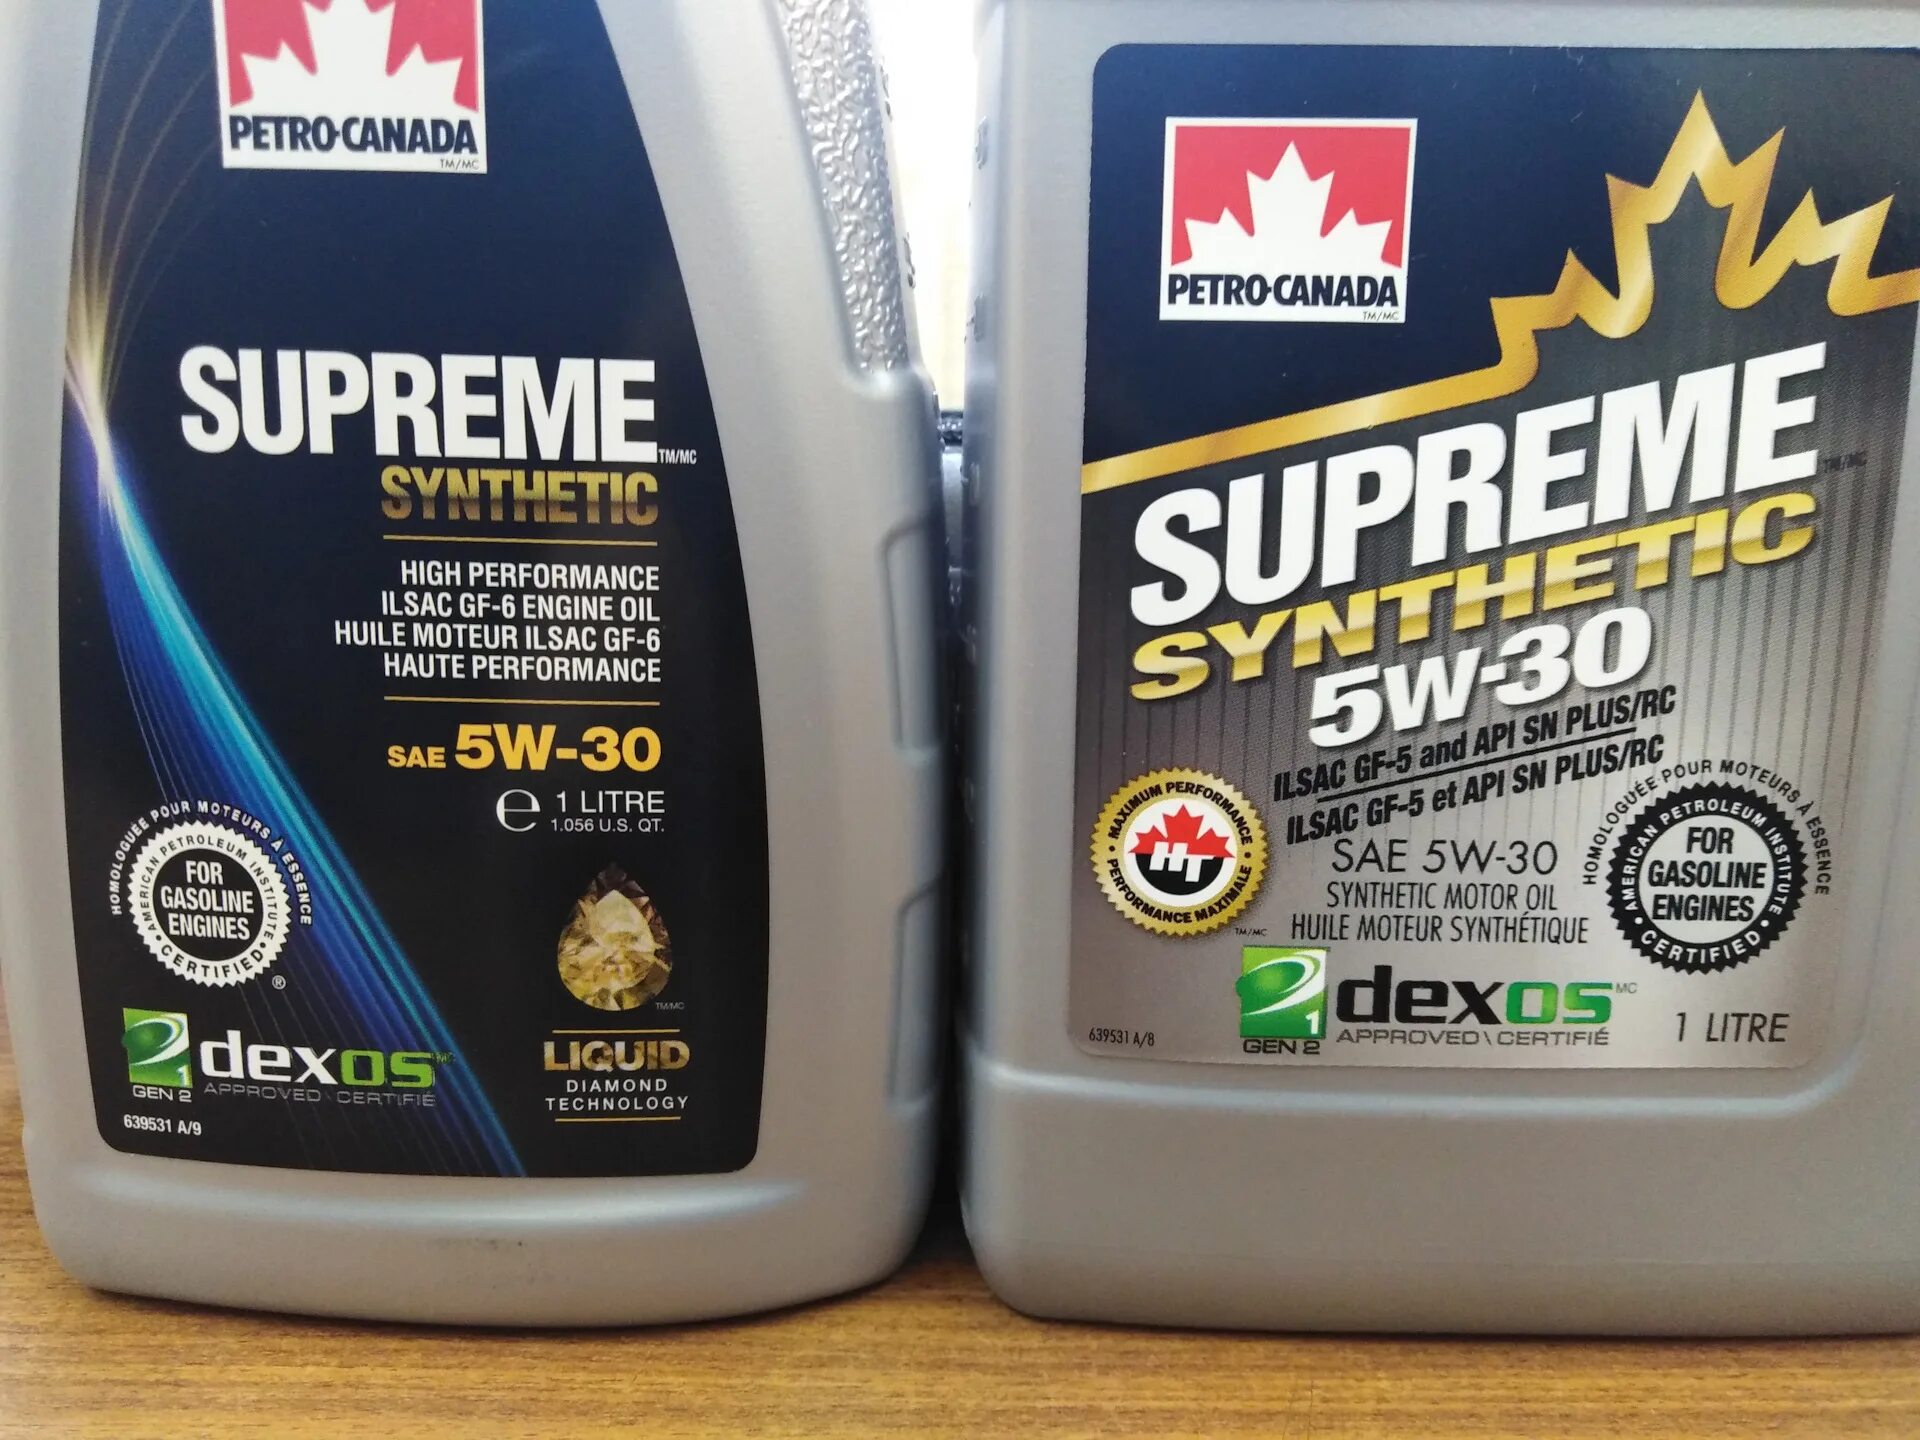 Масло сид jd. Petro Canada Supreme Synthetic 5w-30. Petro Canada 5w30. Масло Петро Канада 5w30. Petro Canada 5w40 Supreme Synthetic.